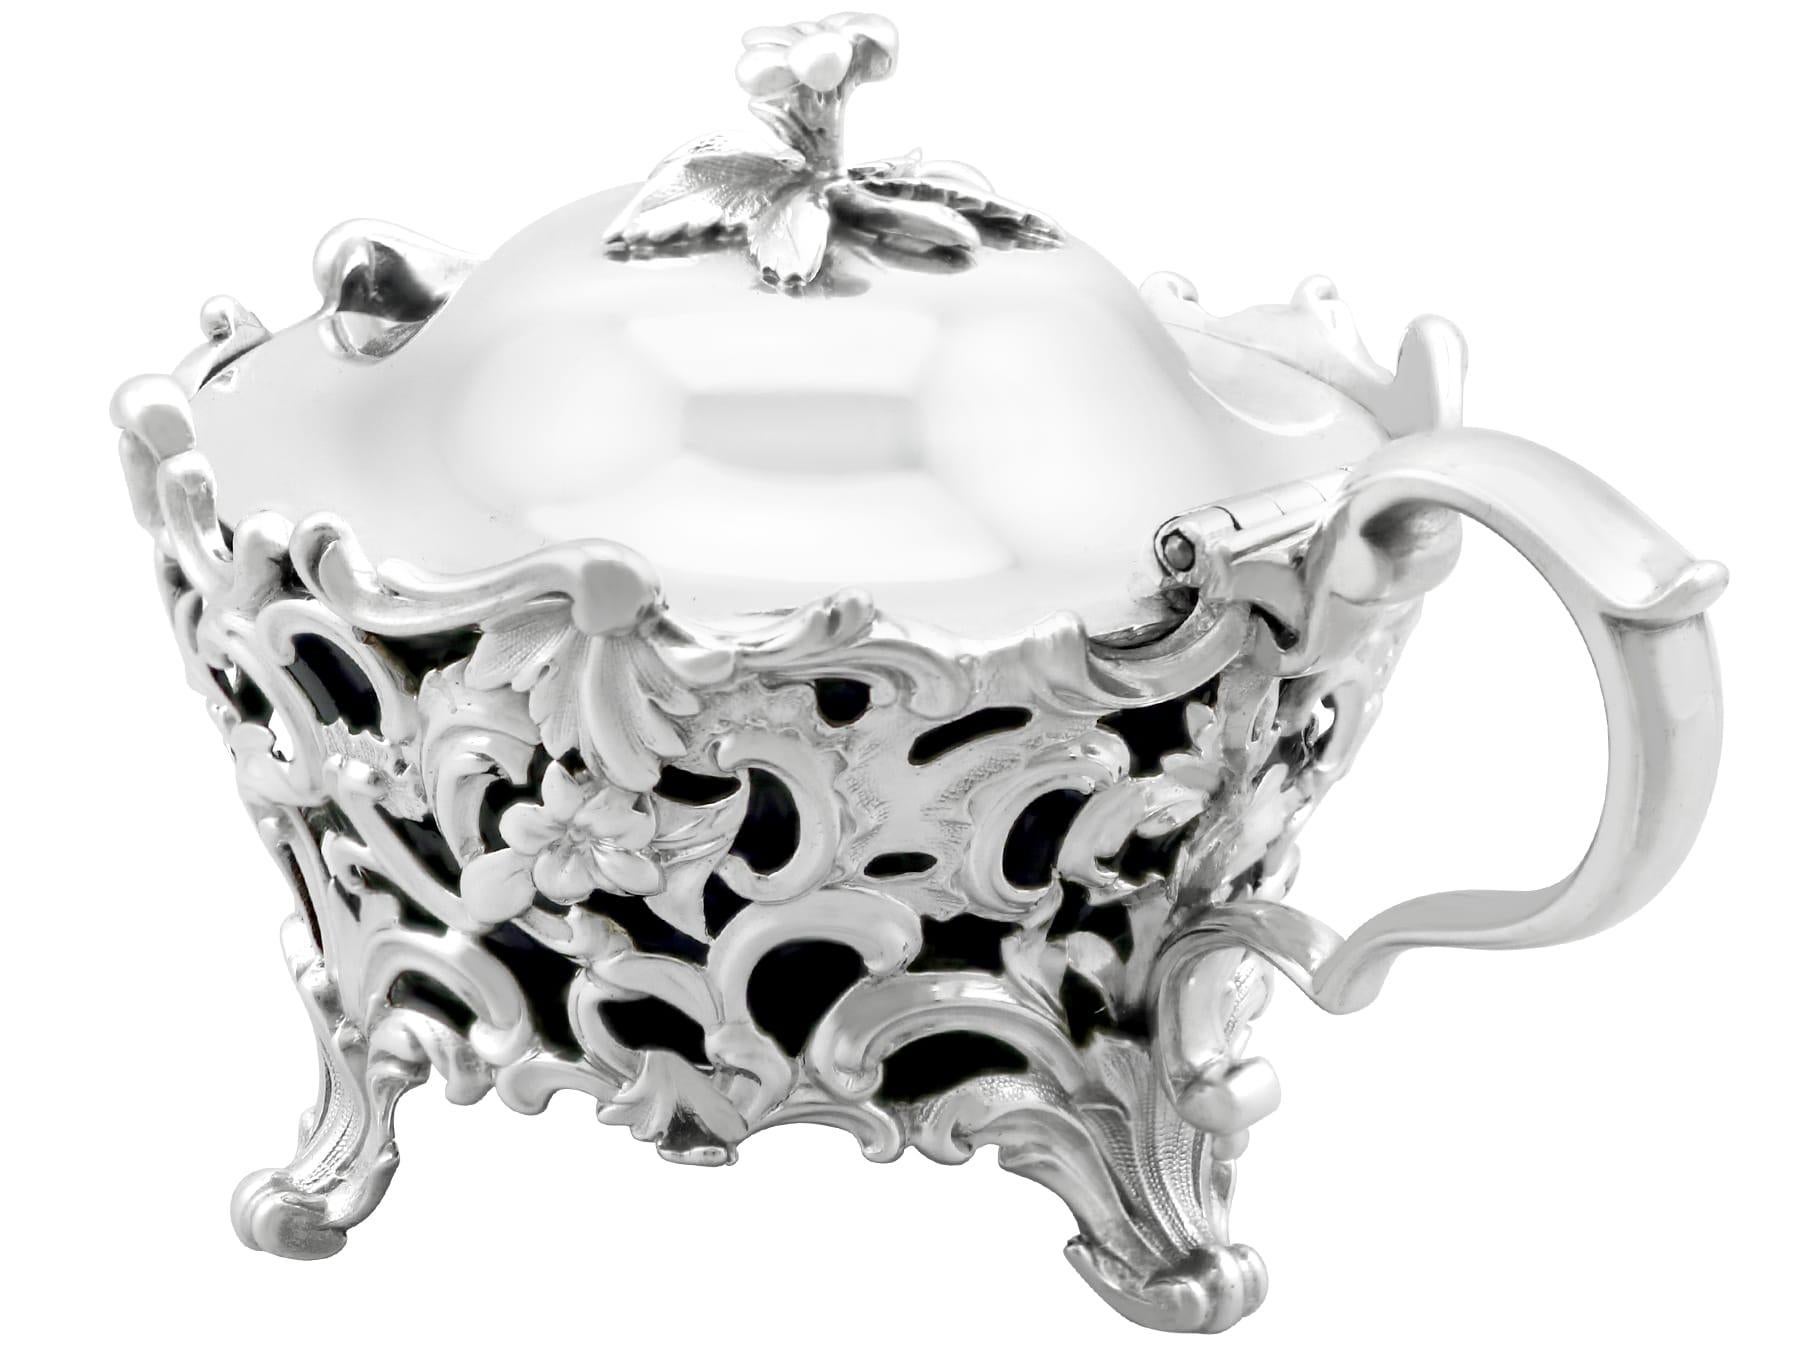 Antique Victorian Sterling Silver Mustard Pot (1844) In Excellent Condition For Sale In Jesmond, Newcastle Upon Tyne